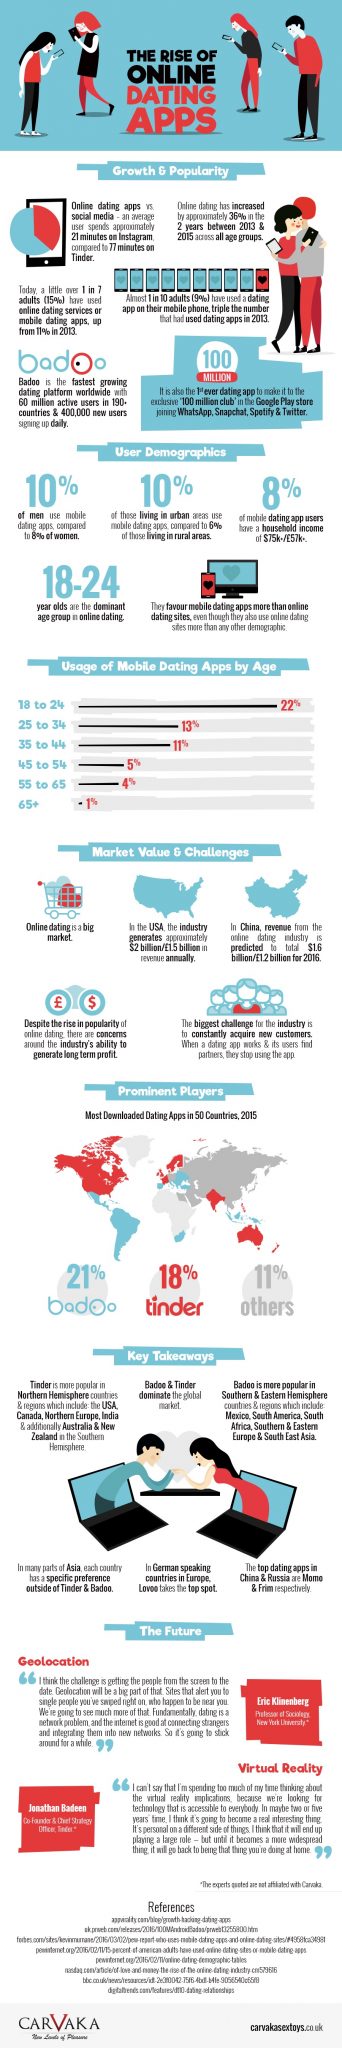 the-rise-of-online-dating-apps-infographic